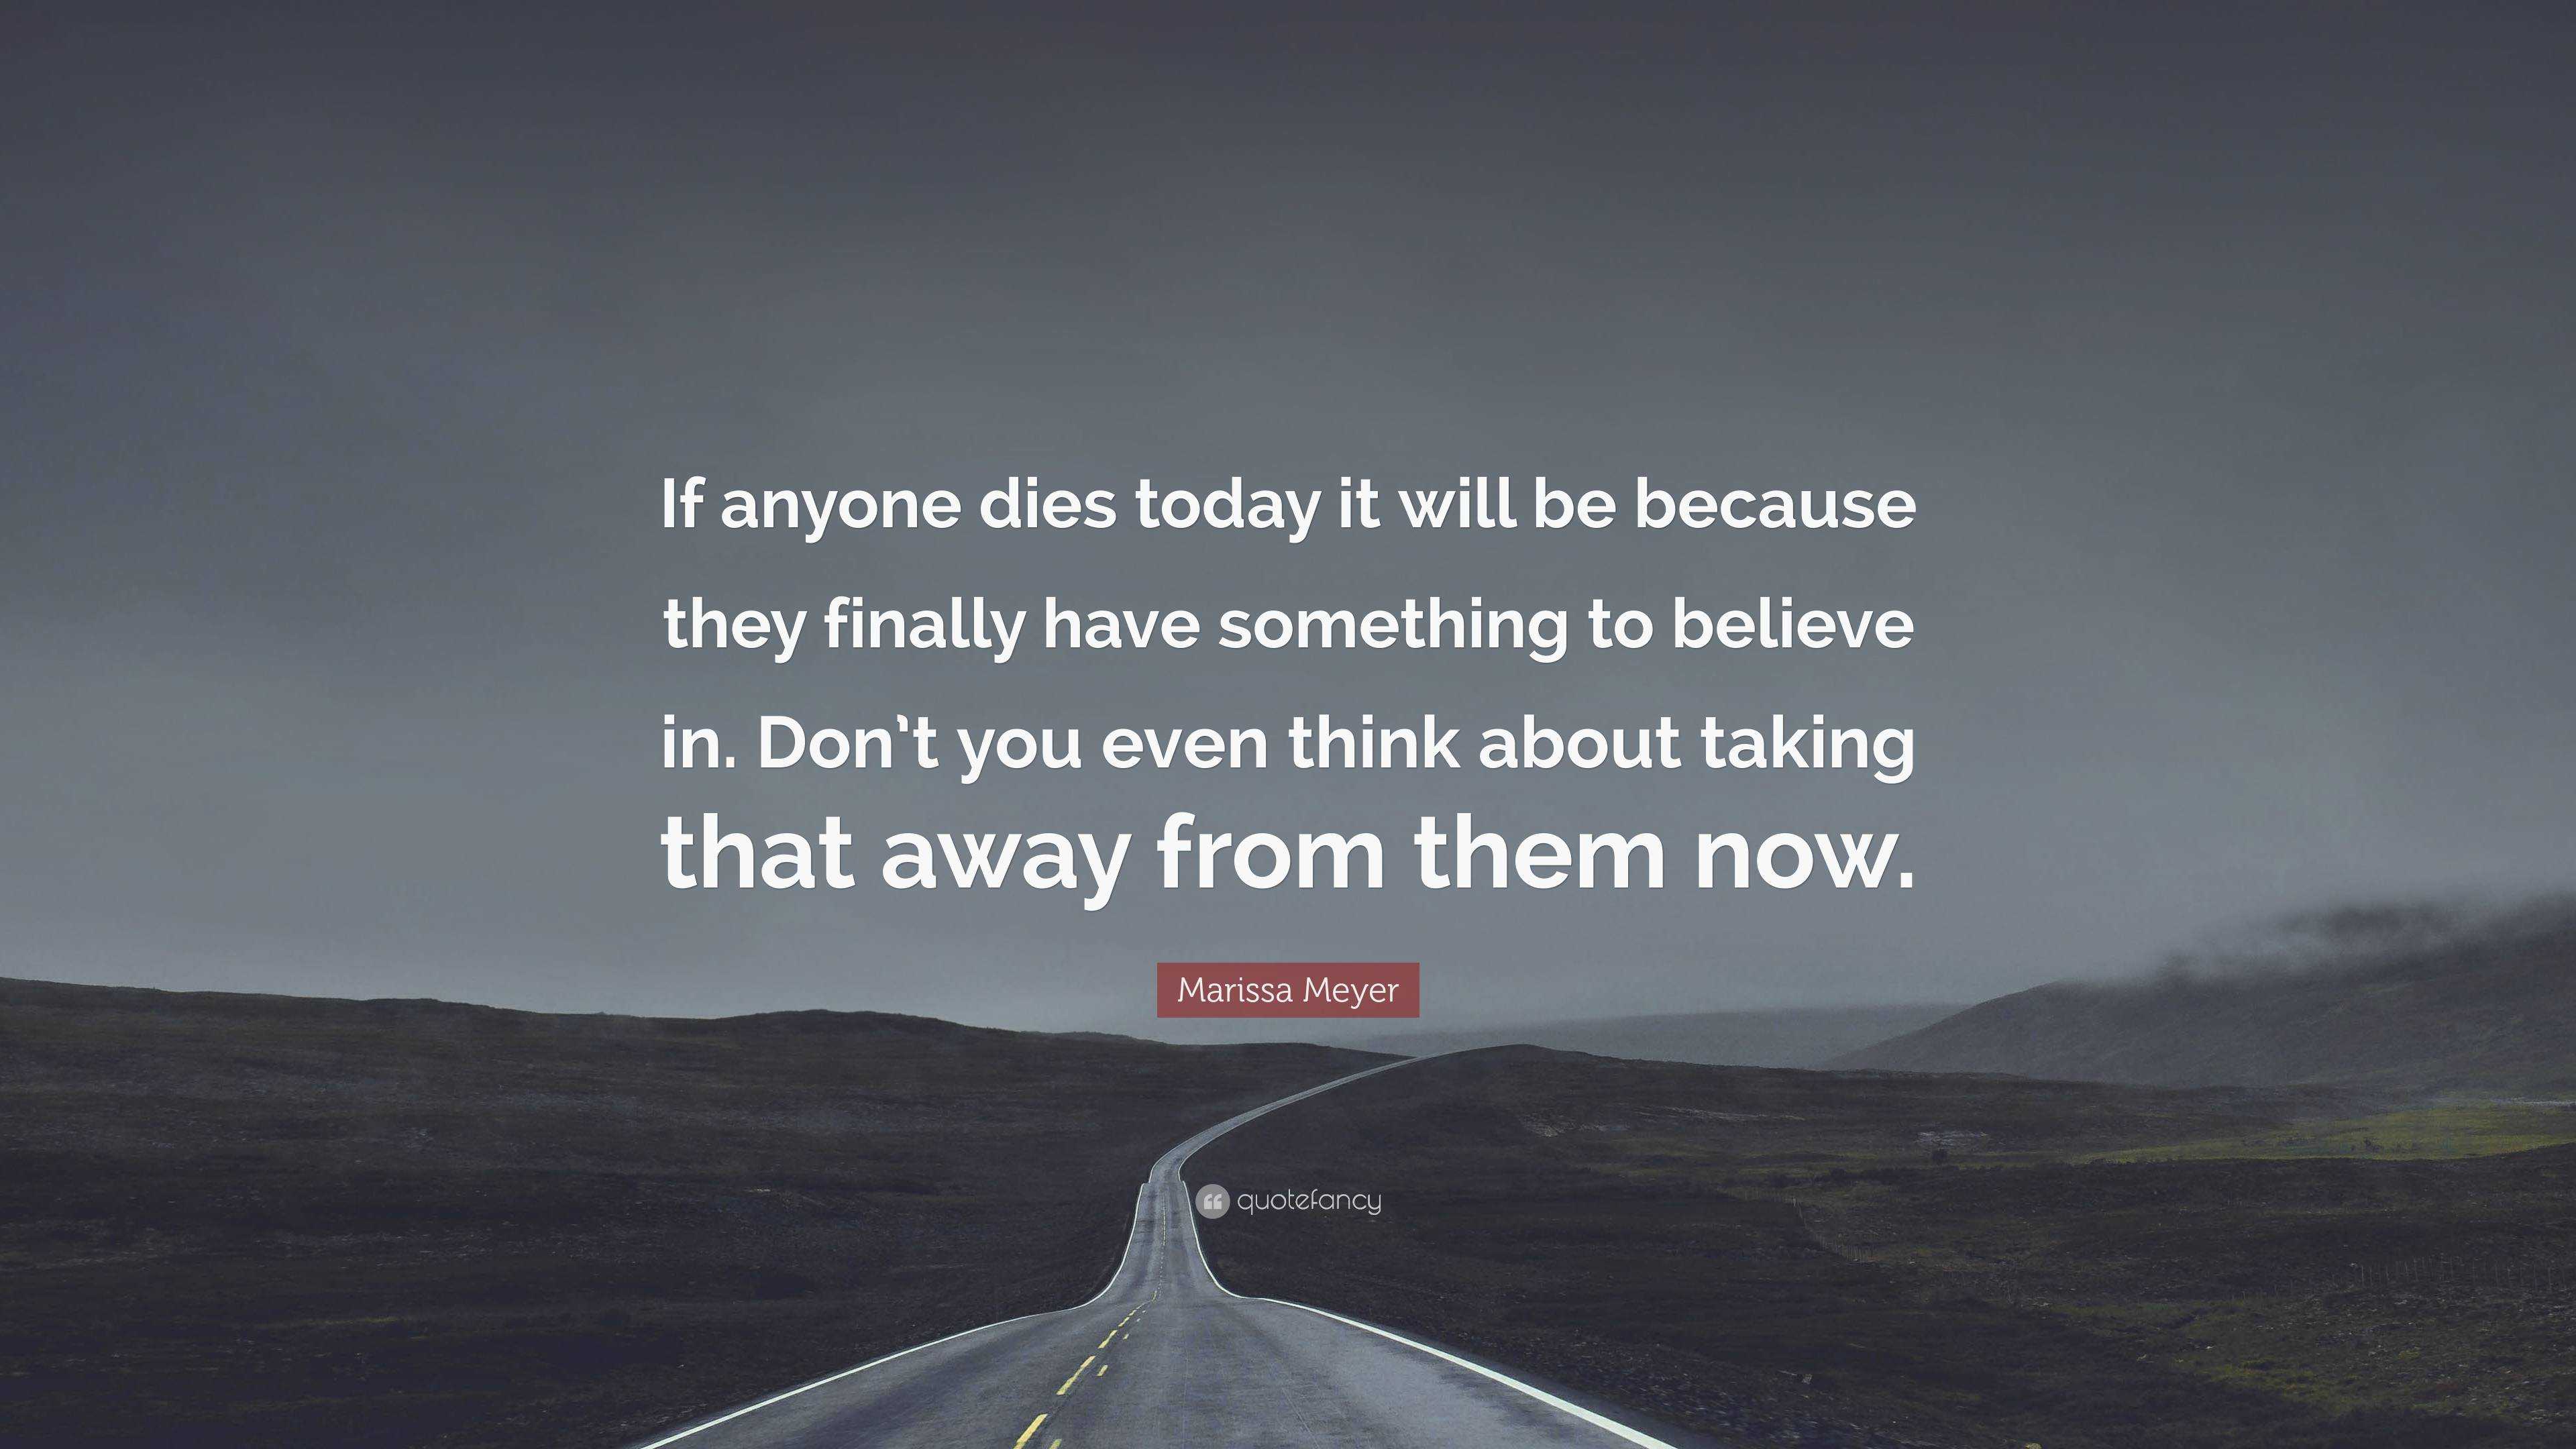 Marissa Meyer Quote: “If anyone dies today it will be because they